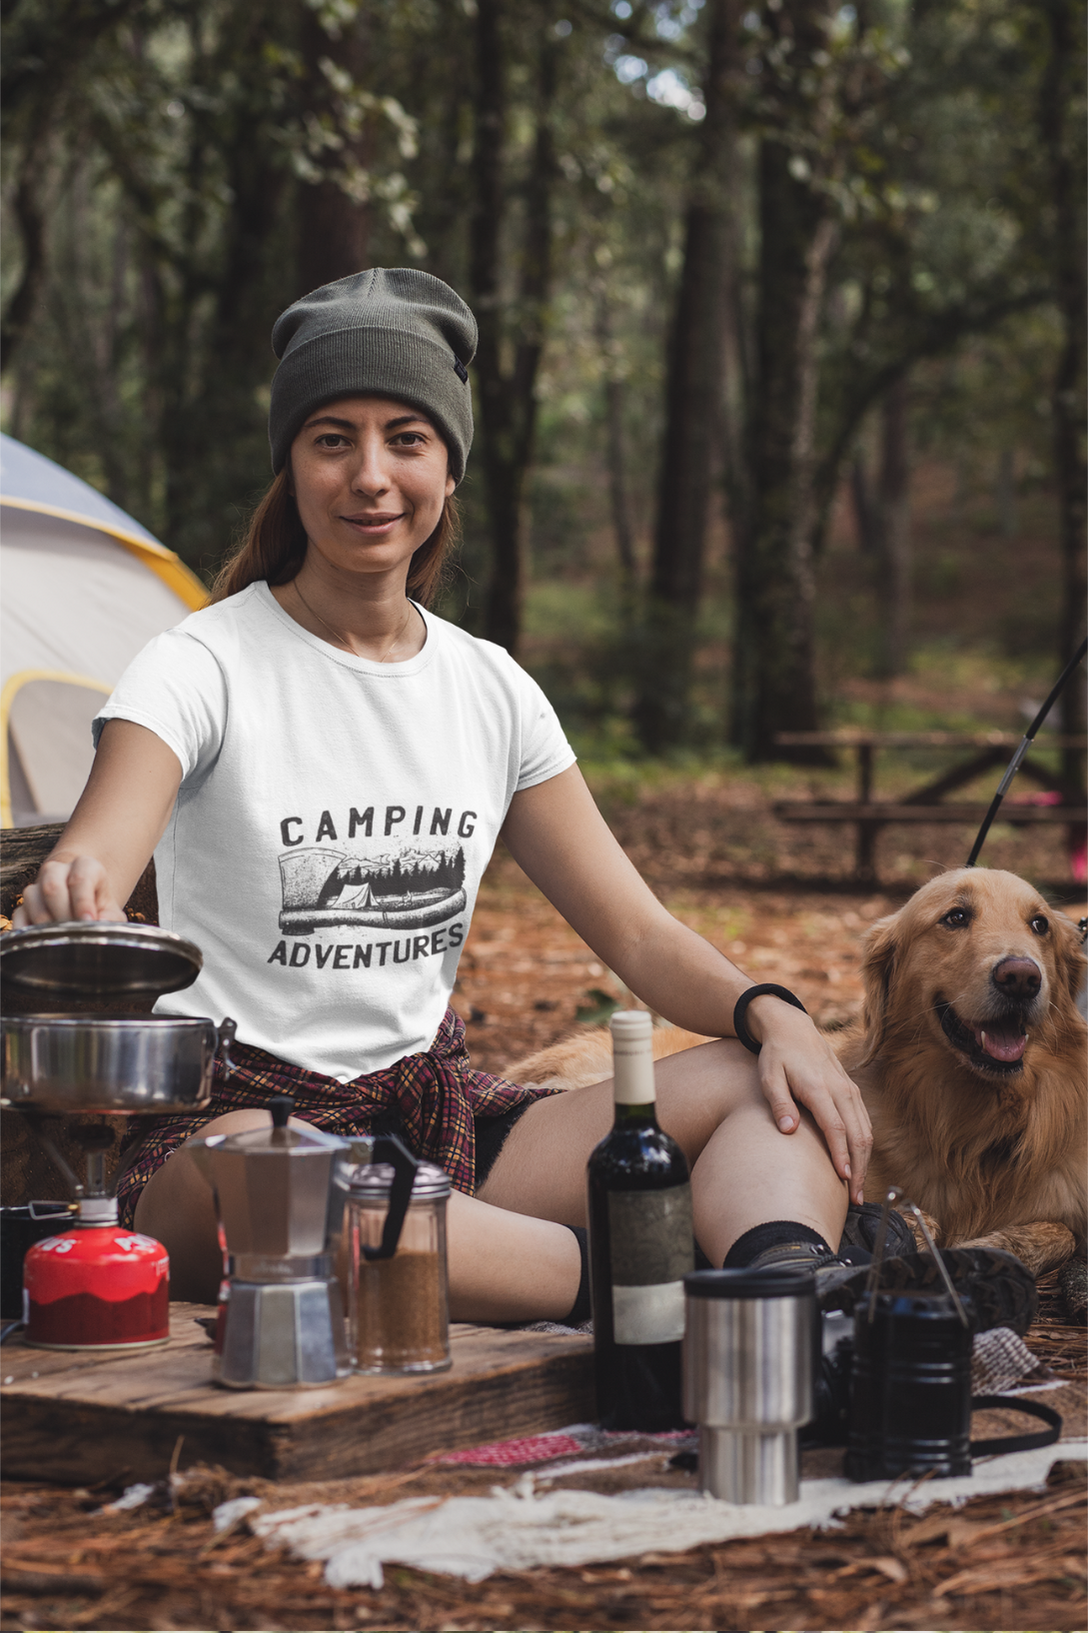 Camping Adventures Printed T-Shirt For Women - WowWaves - 5